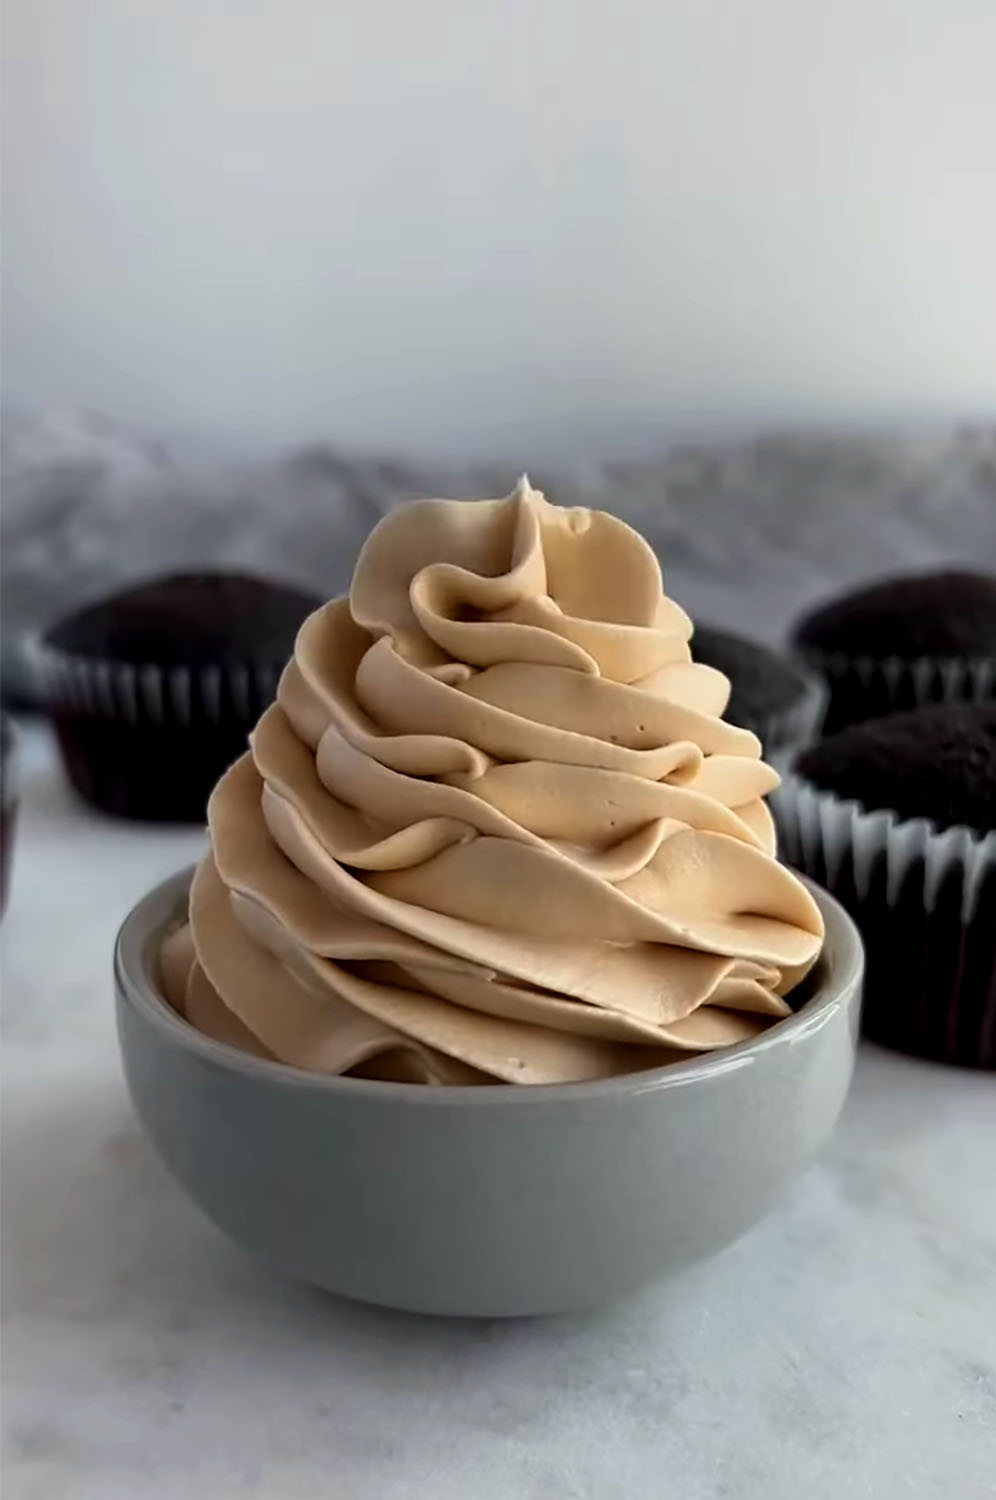 Coffee Buttercream Frosting